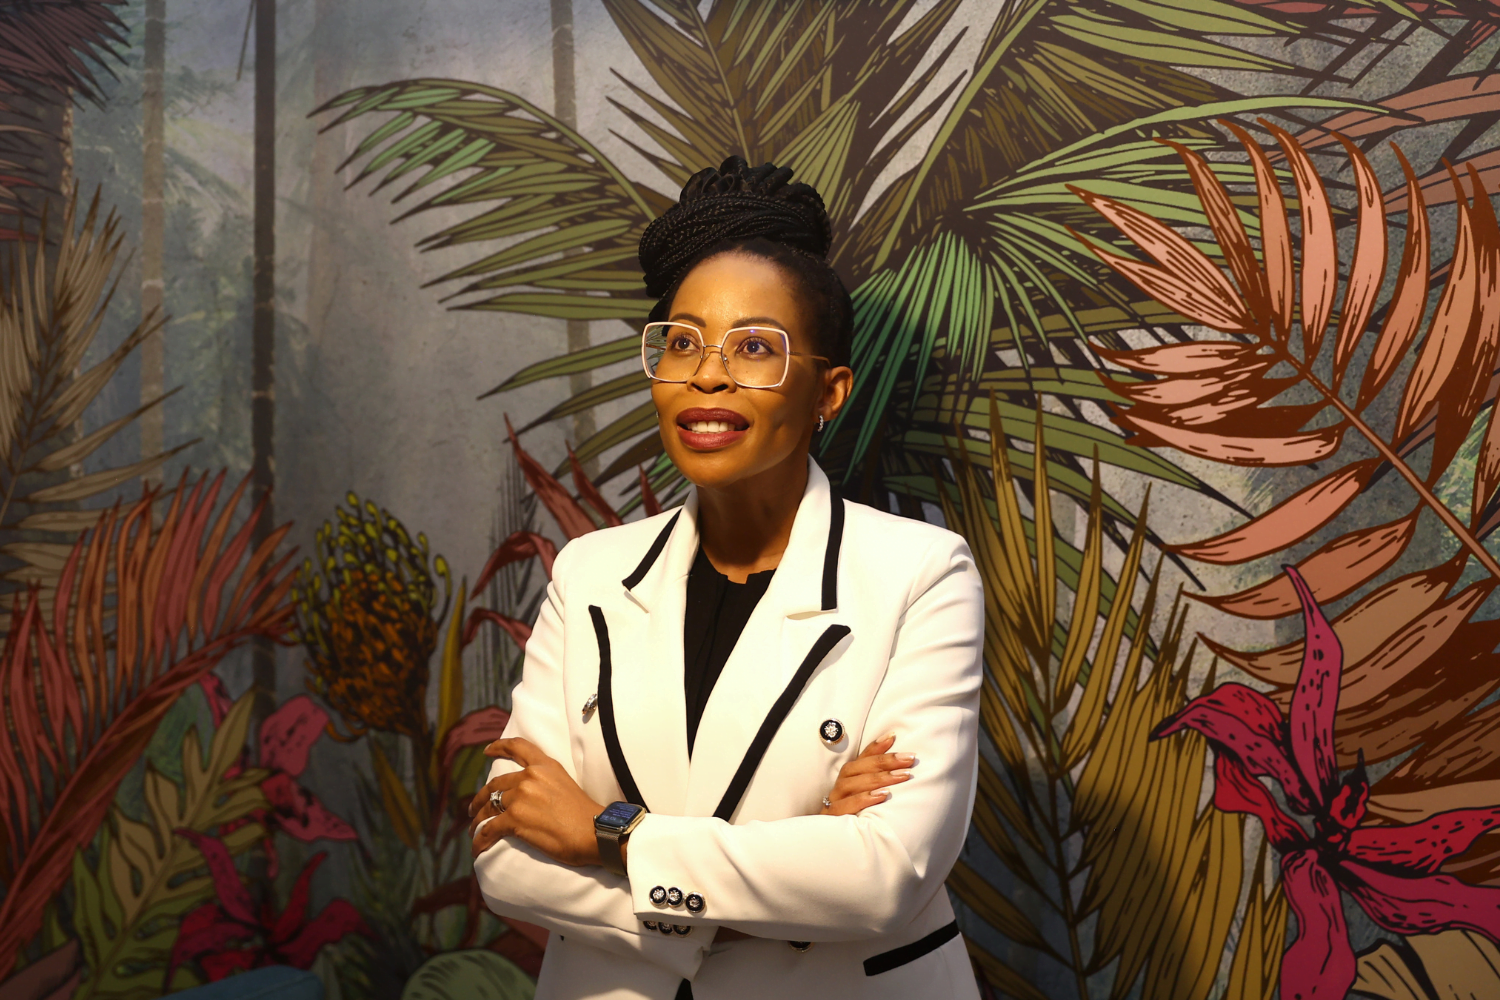 Queen Mokulubete, Founder of Somila Engineering, poses in front of a palm tree wall painting in her office.